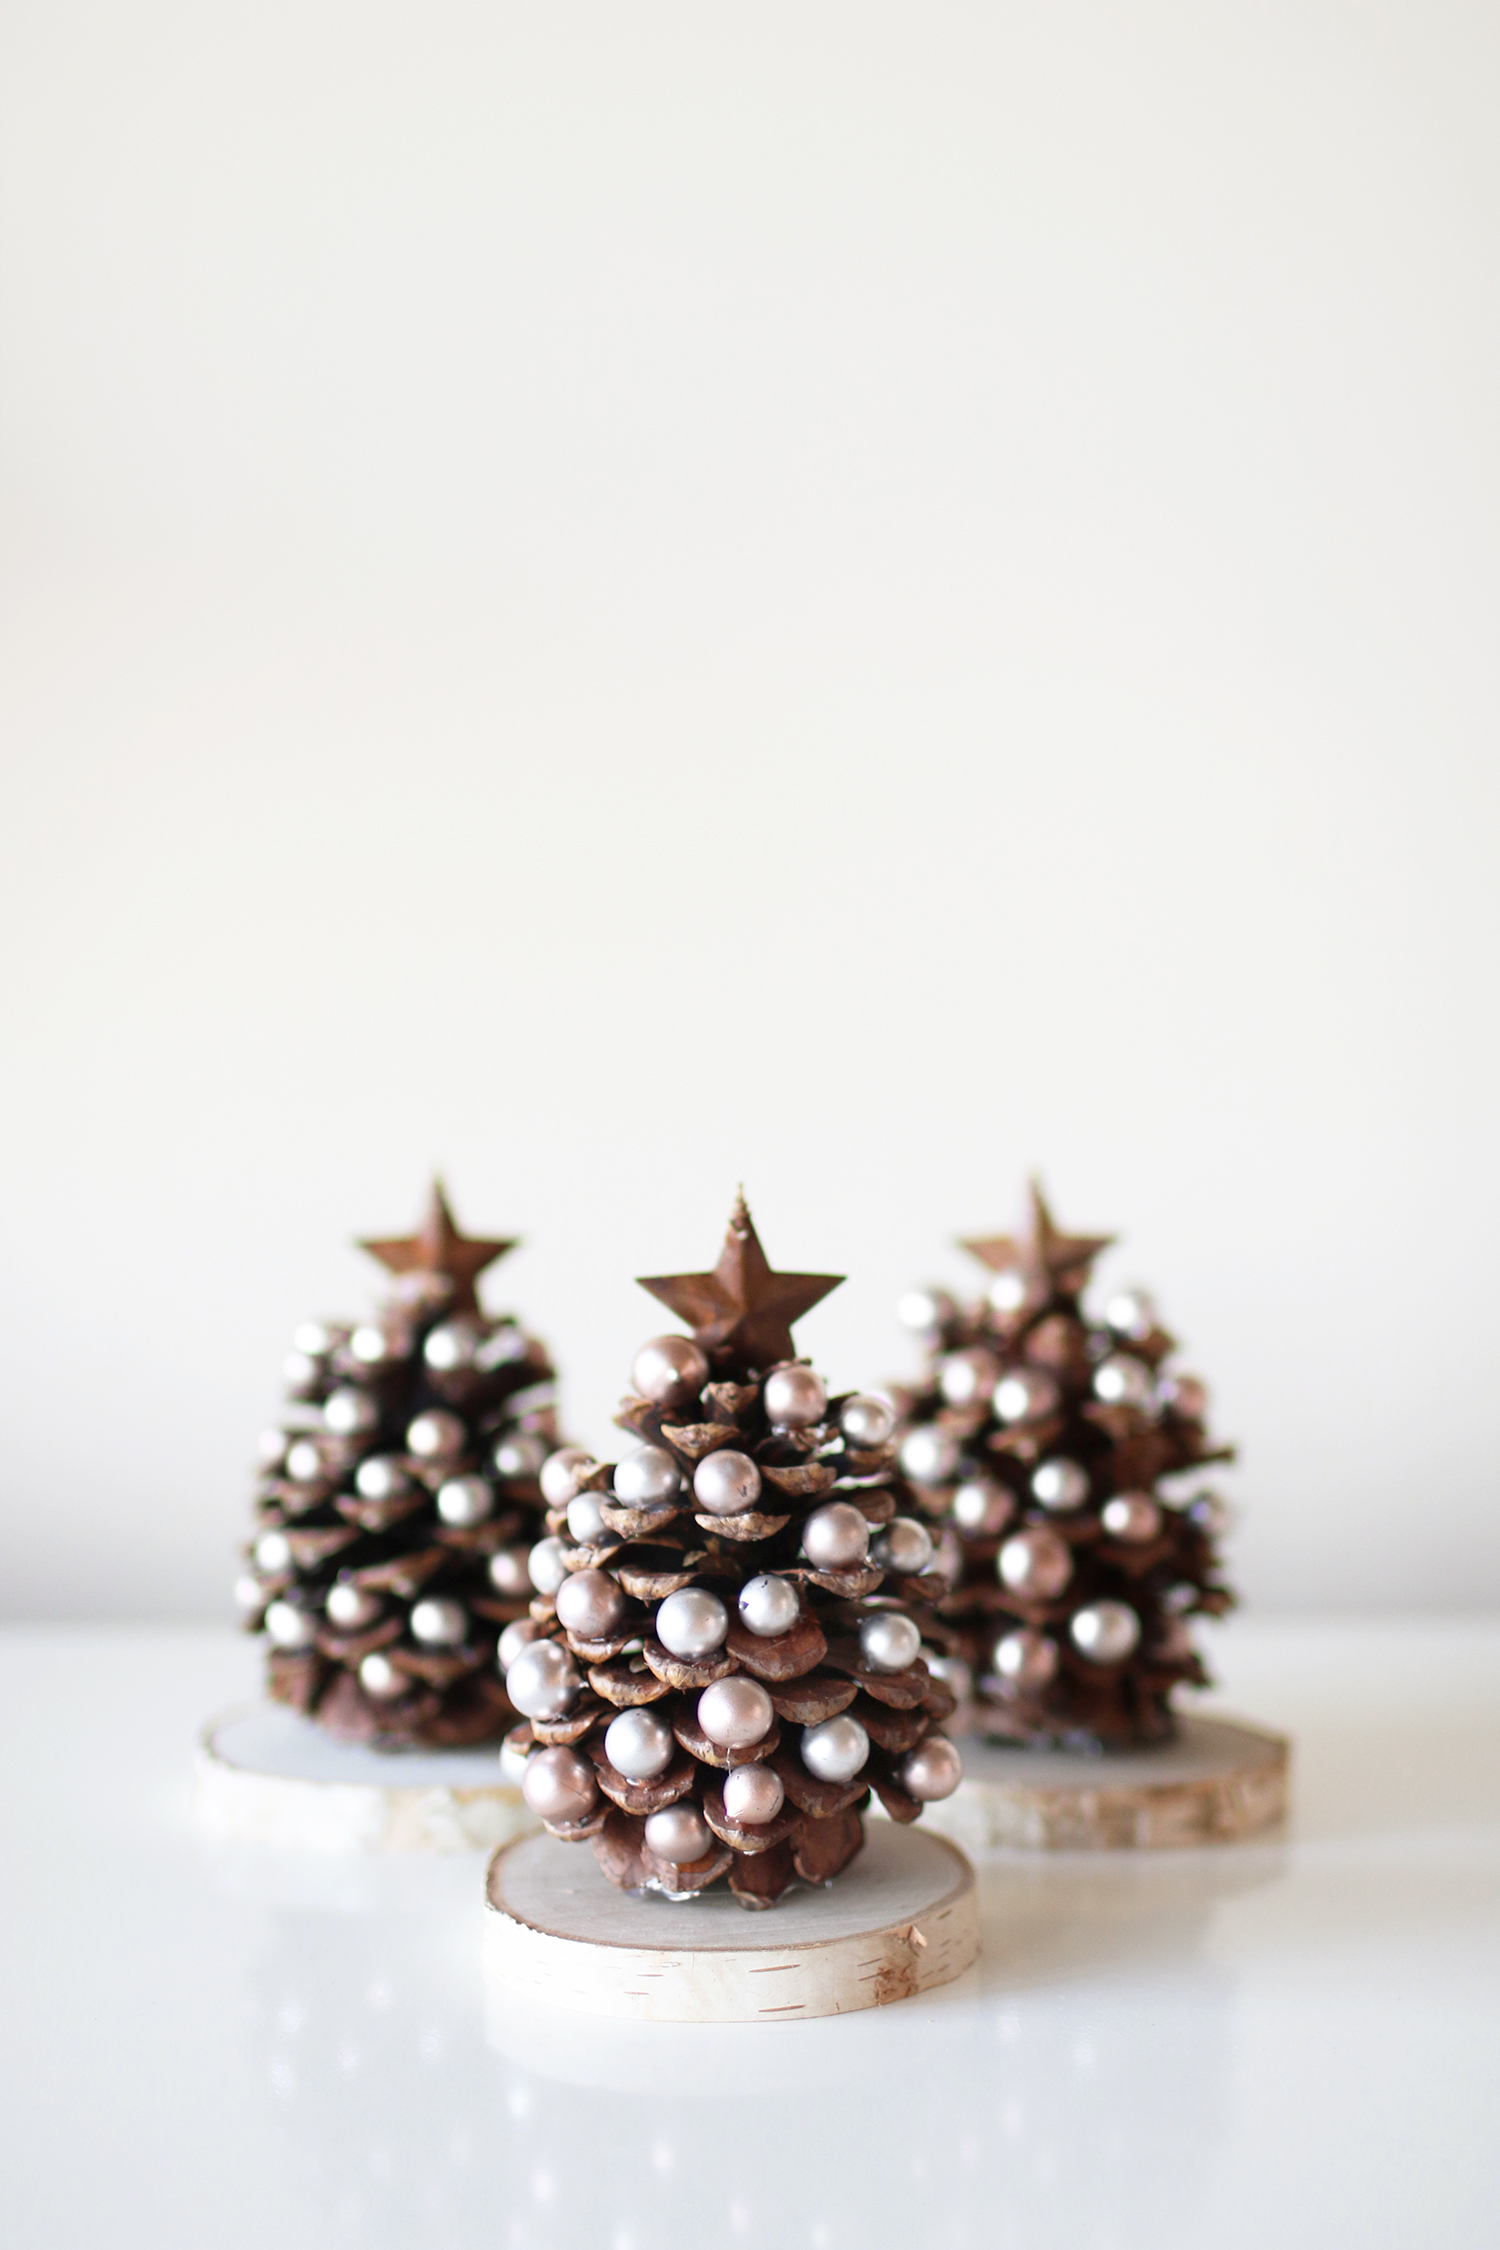 A fun and darling pinecone christmas tree craft to have the kids join in on! I absolutely love handmade items and little details around the house this time of year - completely invites the magic and spirit of Christmas into our home! Catch the step-by-step walk through and supply list over on Haus of Layne! #ChristmasCraft #PineconeChristmasTreeCraft #ChristmasCraftsForKids #DIYChristmasCraft #ChristmasCraftIdeas #EasyChristmasCrafts #HolidayCraftIdeas #PineconeCraftIdeasForKids